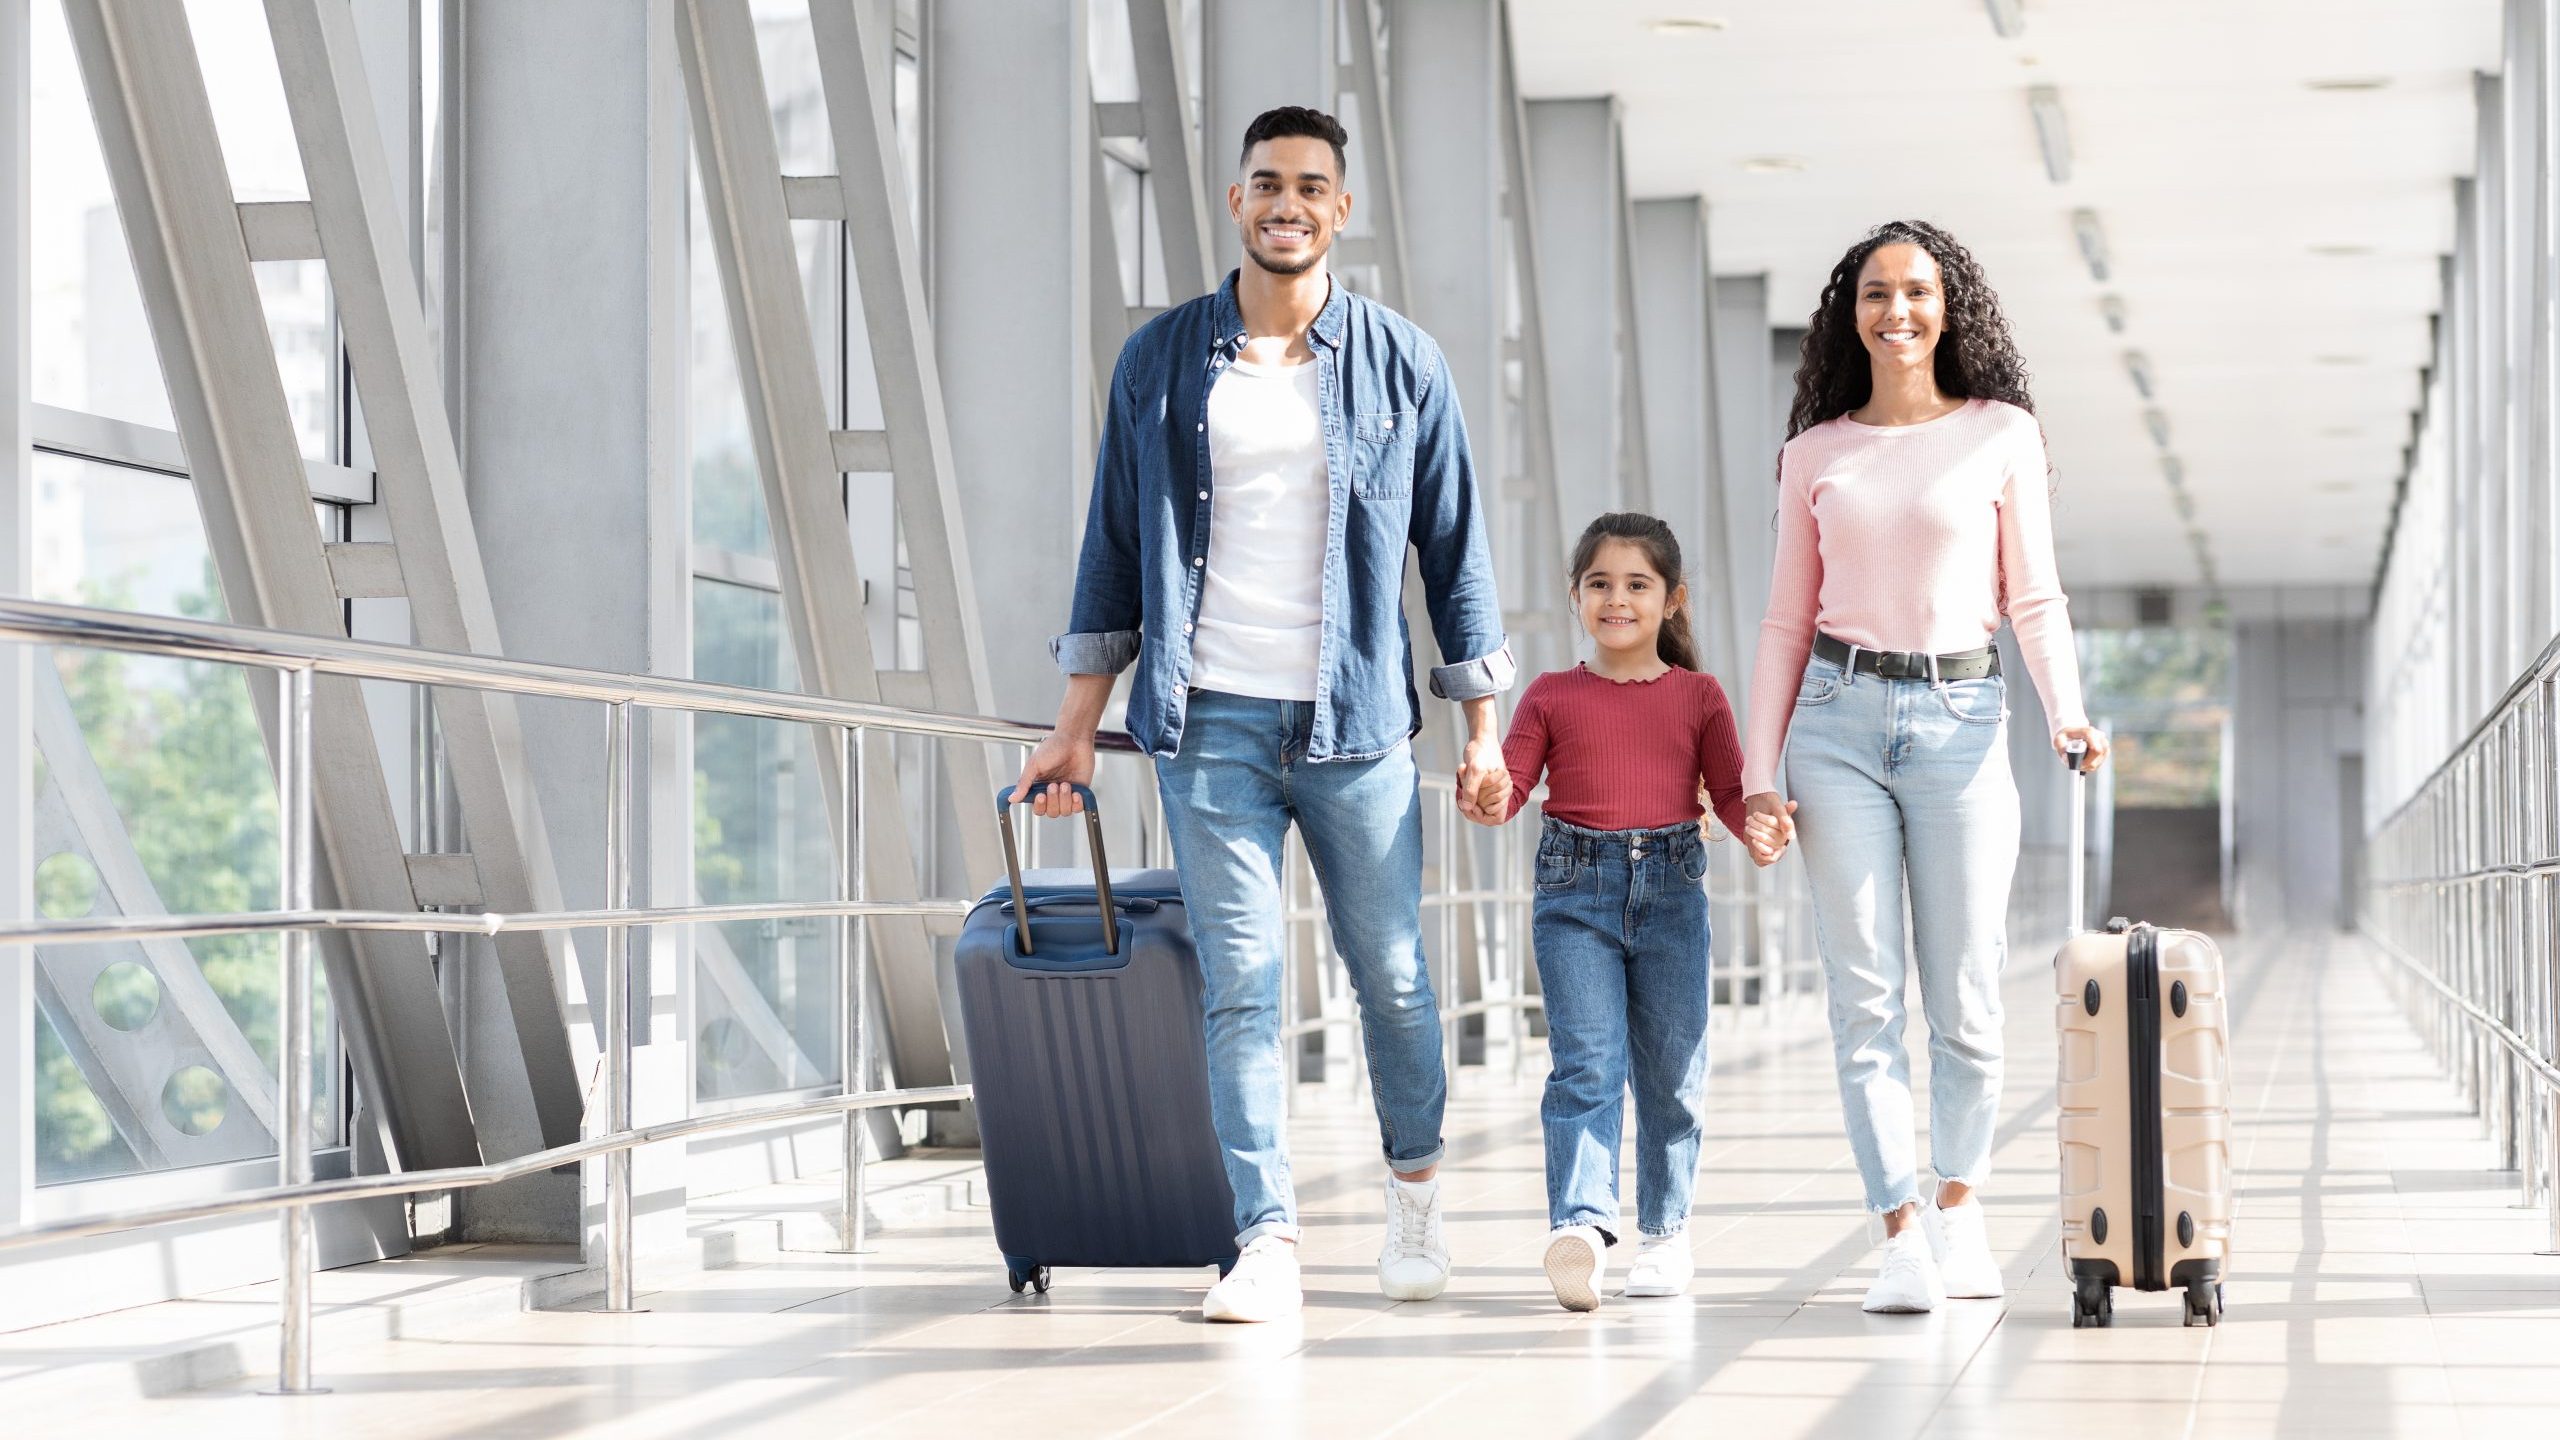 Family walks in airport terminal with suitcases